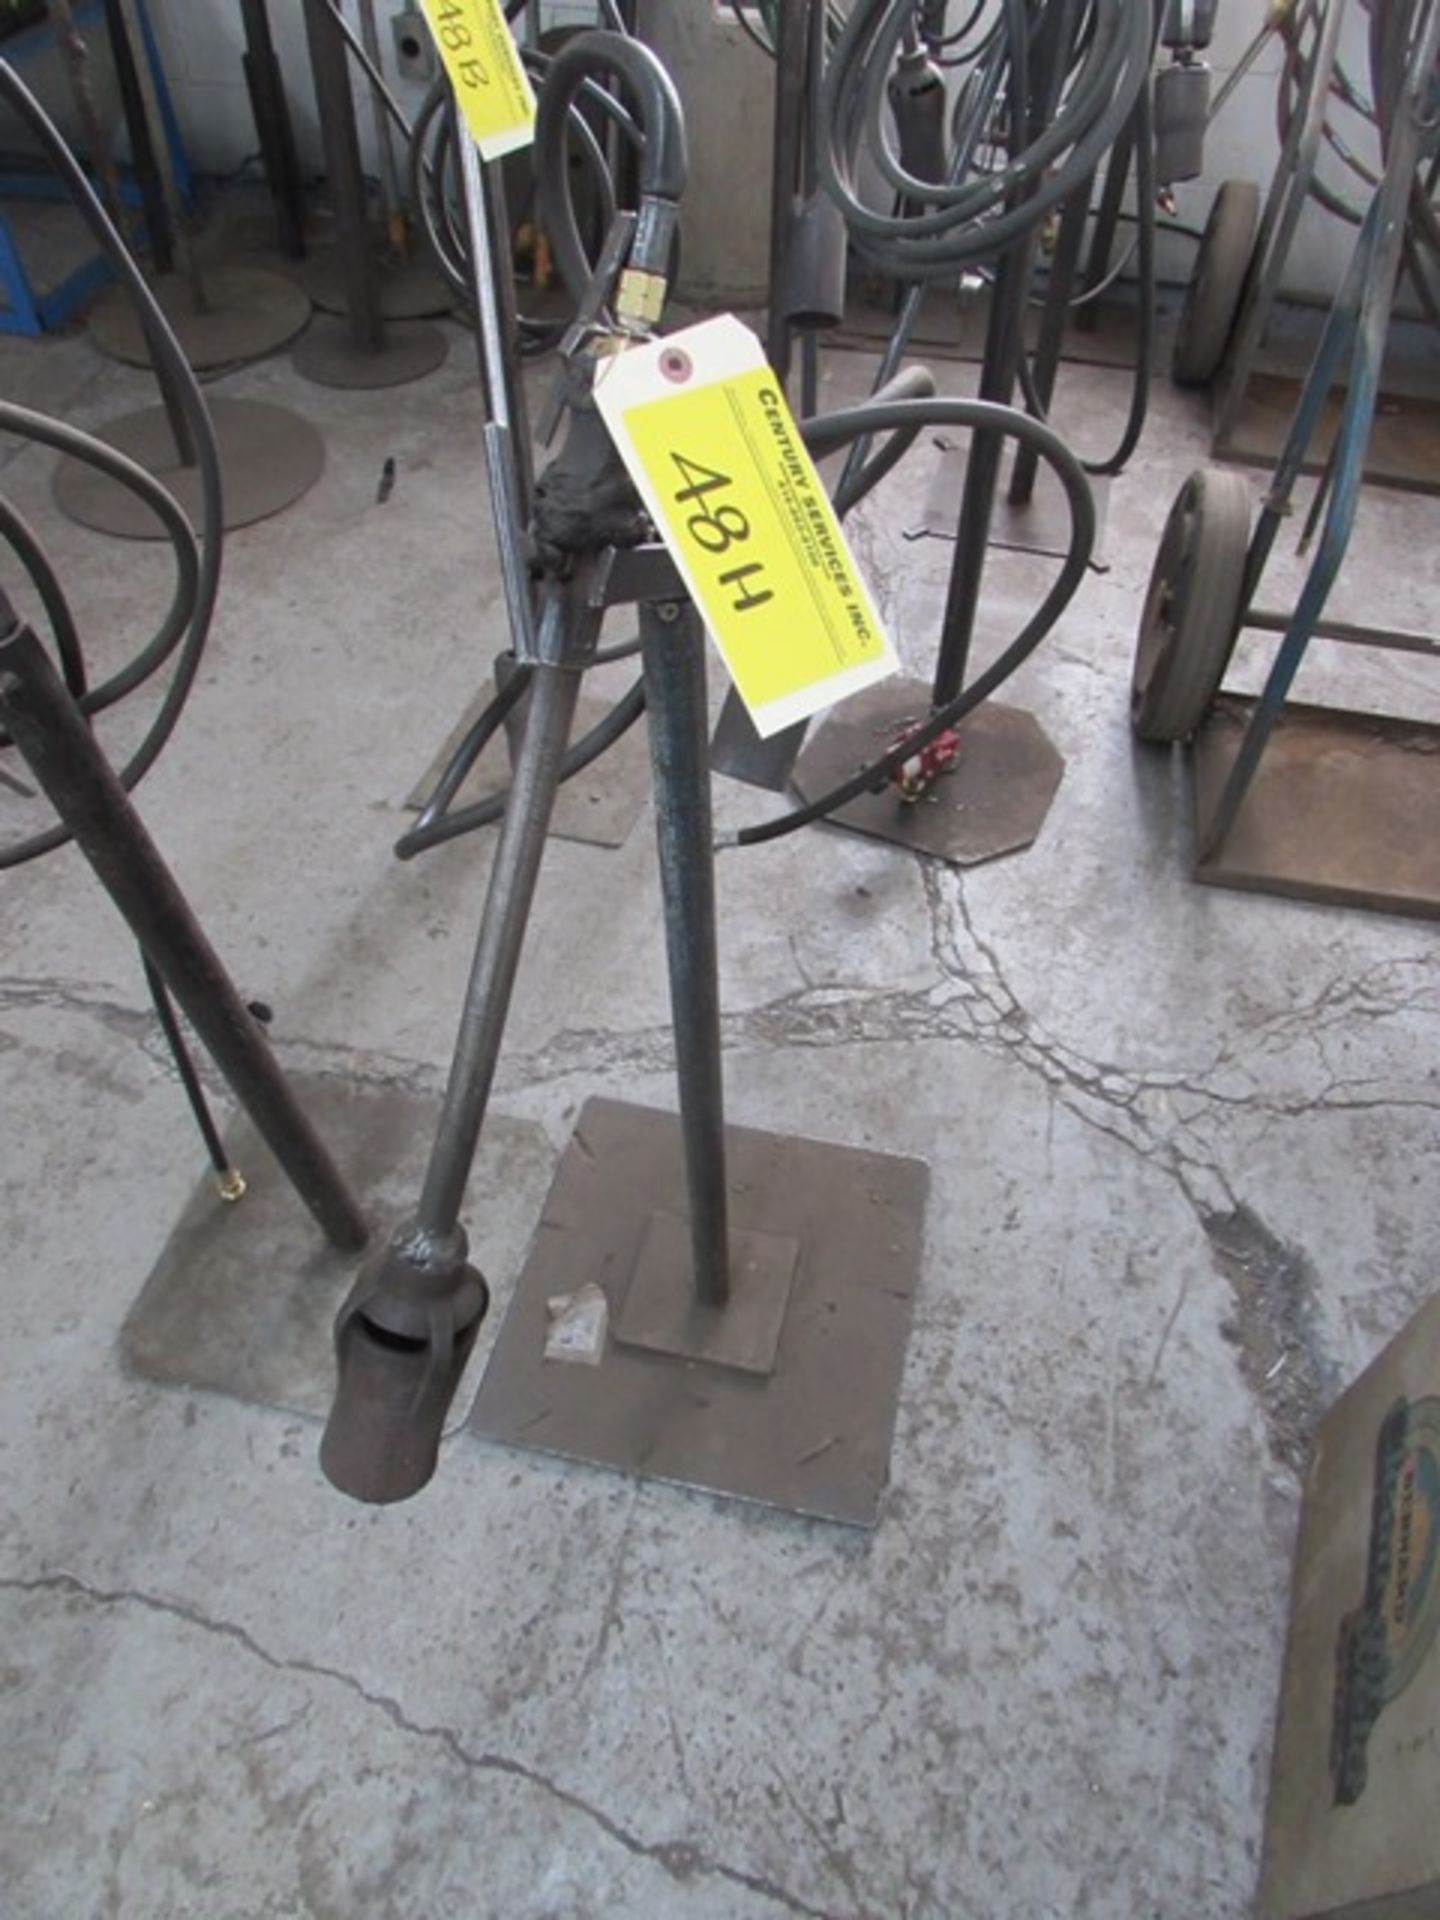 Welding torch on adjustable height stand